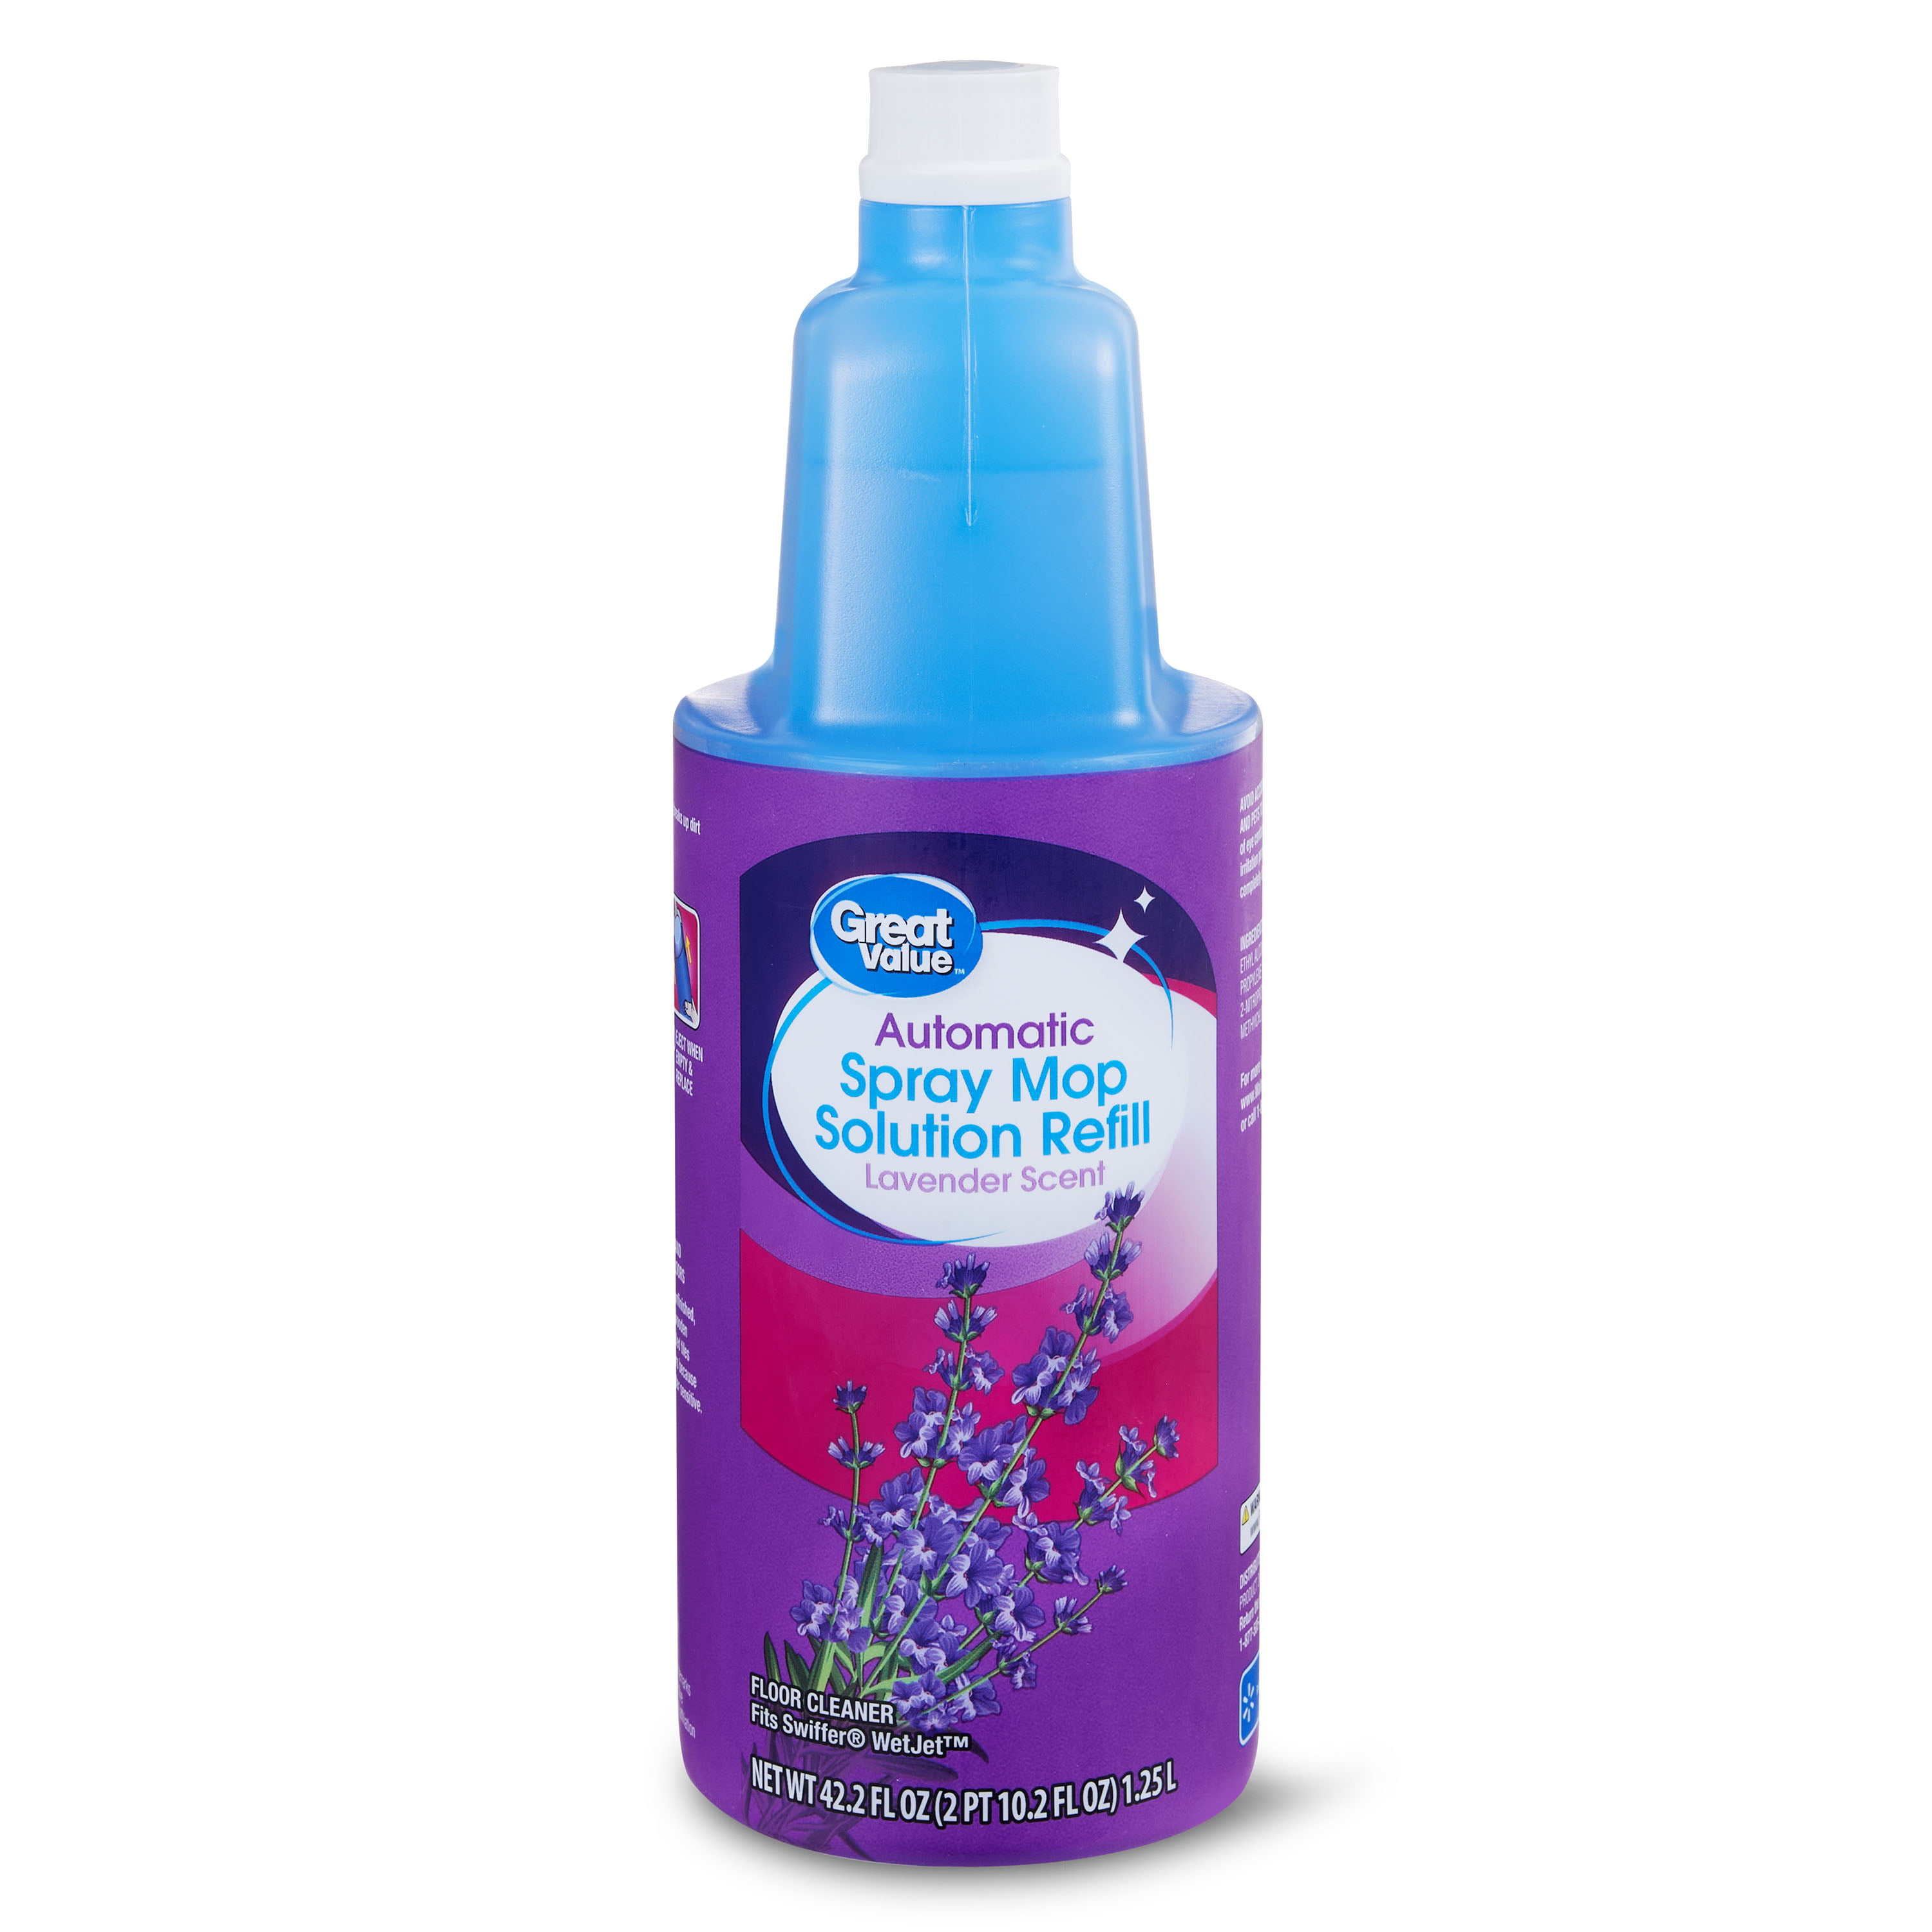 Great Value Auto Spray Mop Floor Cleaning Solution Refill, 42oz Lavender Scent, 1 - Walmart.com